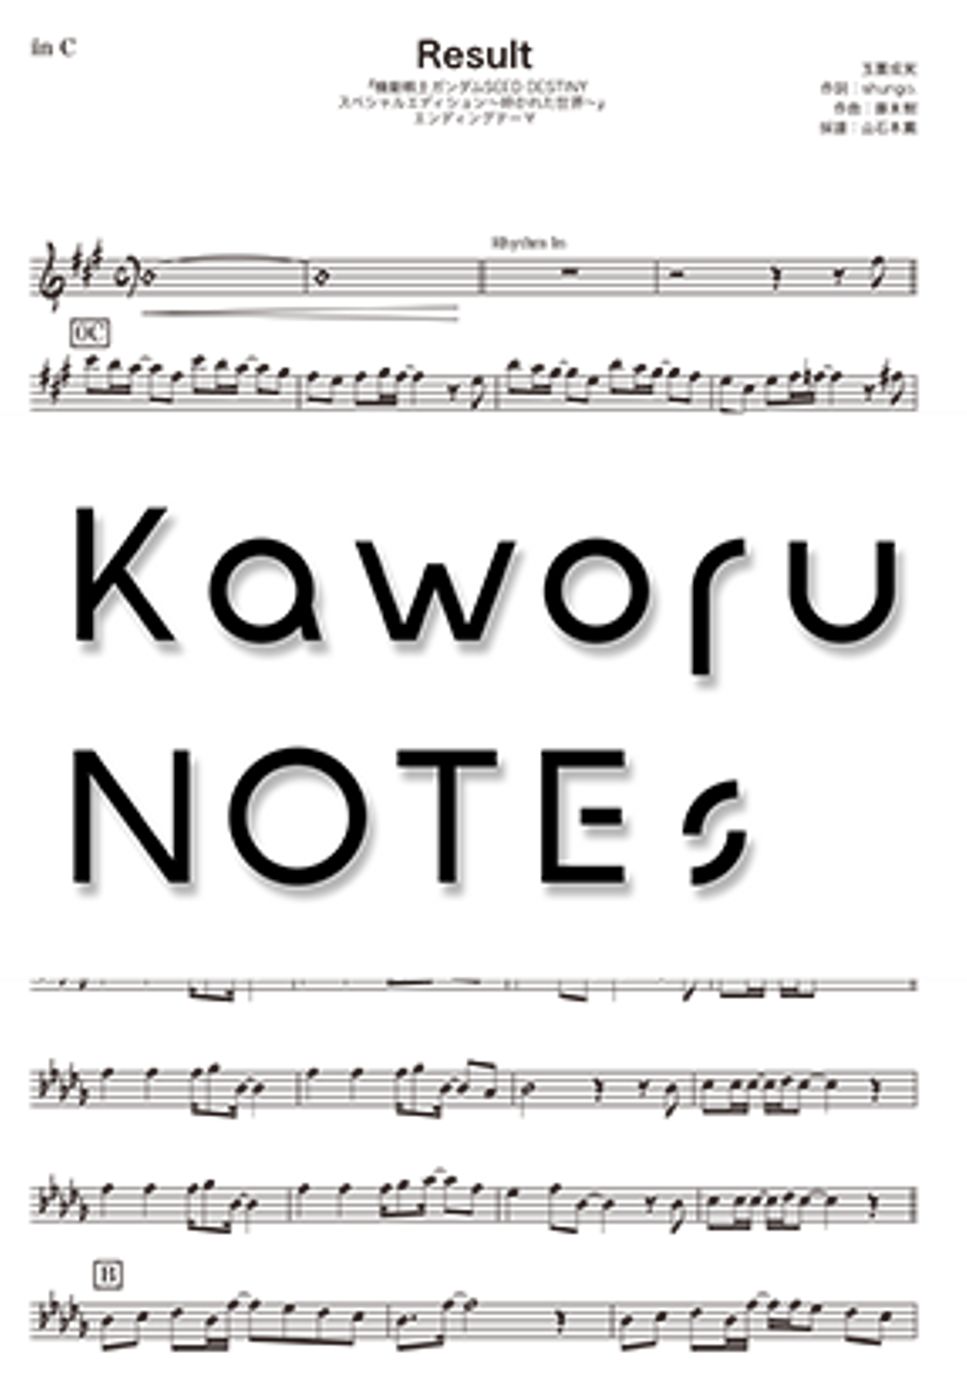 Nami Tamaki - Result（bass clef/Mobile Suit GUNDAM SEED DESTINY） by Kaworu NOTEs